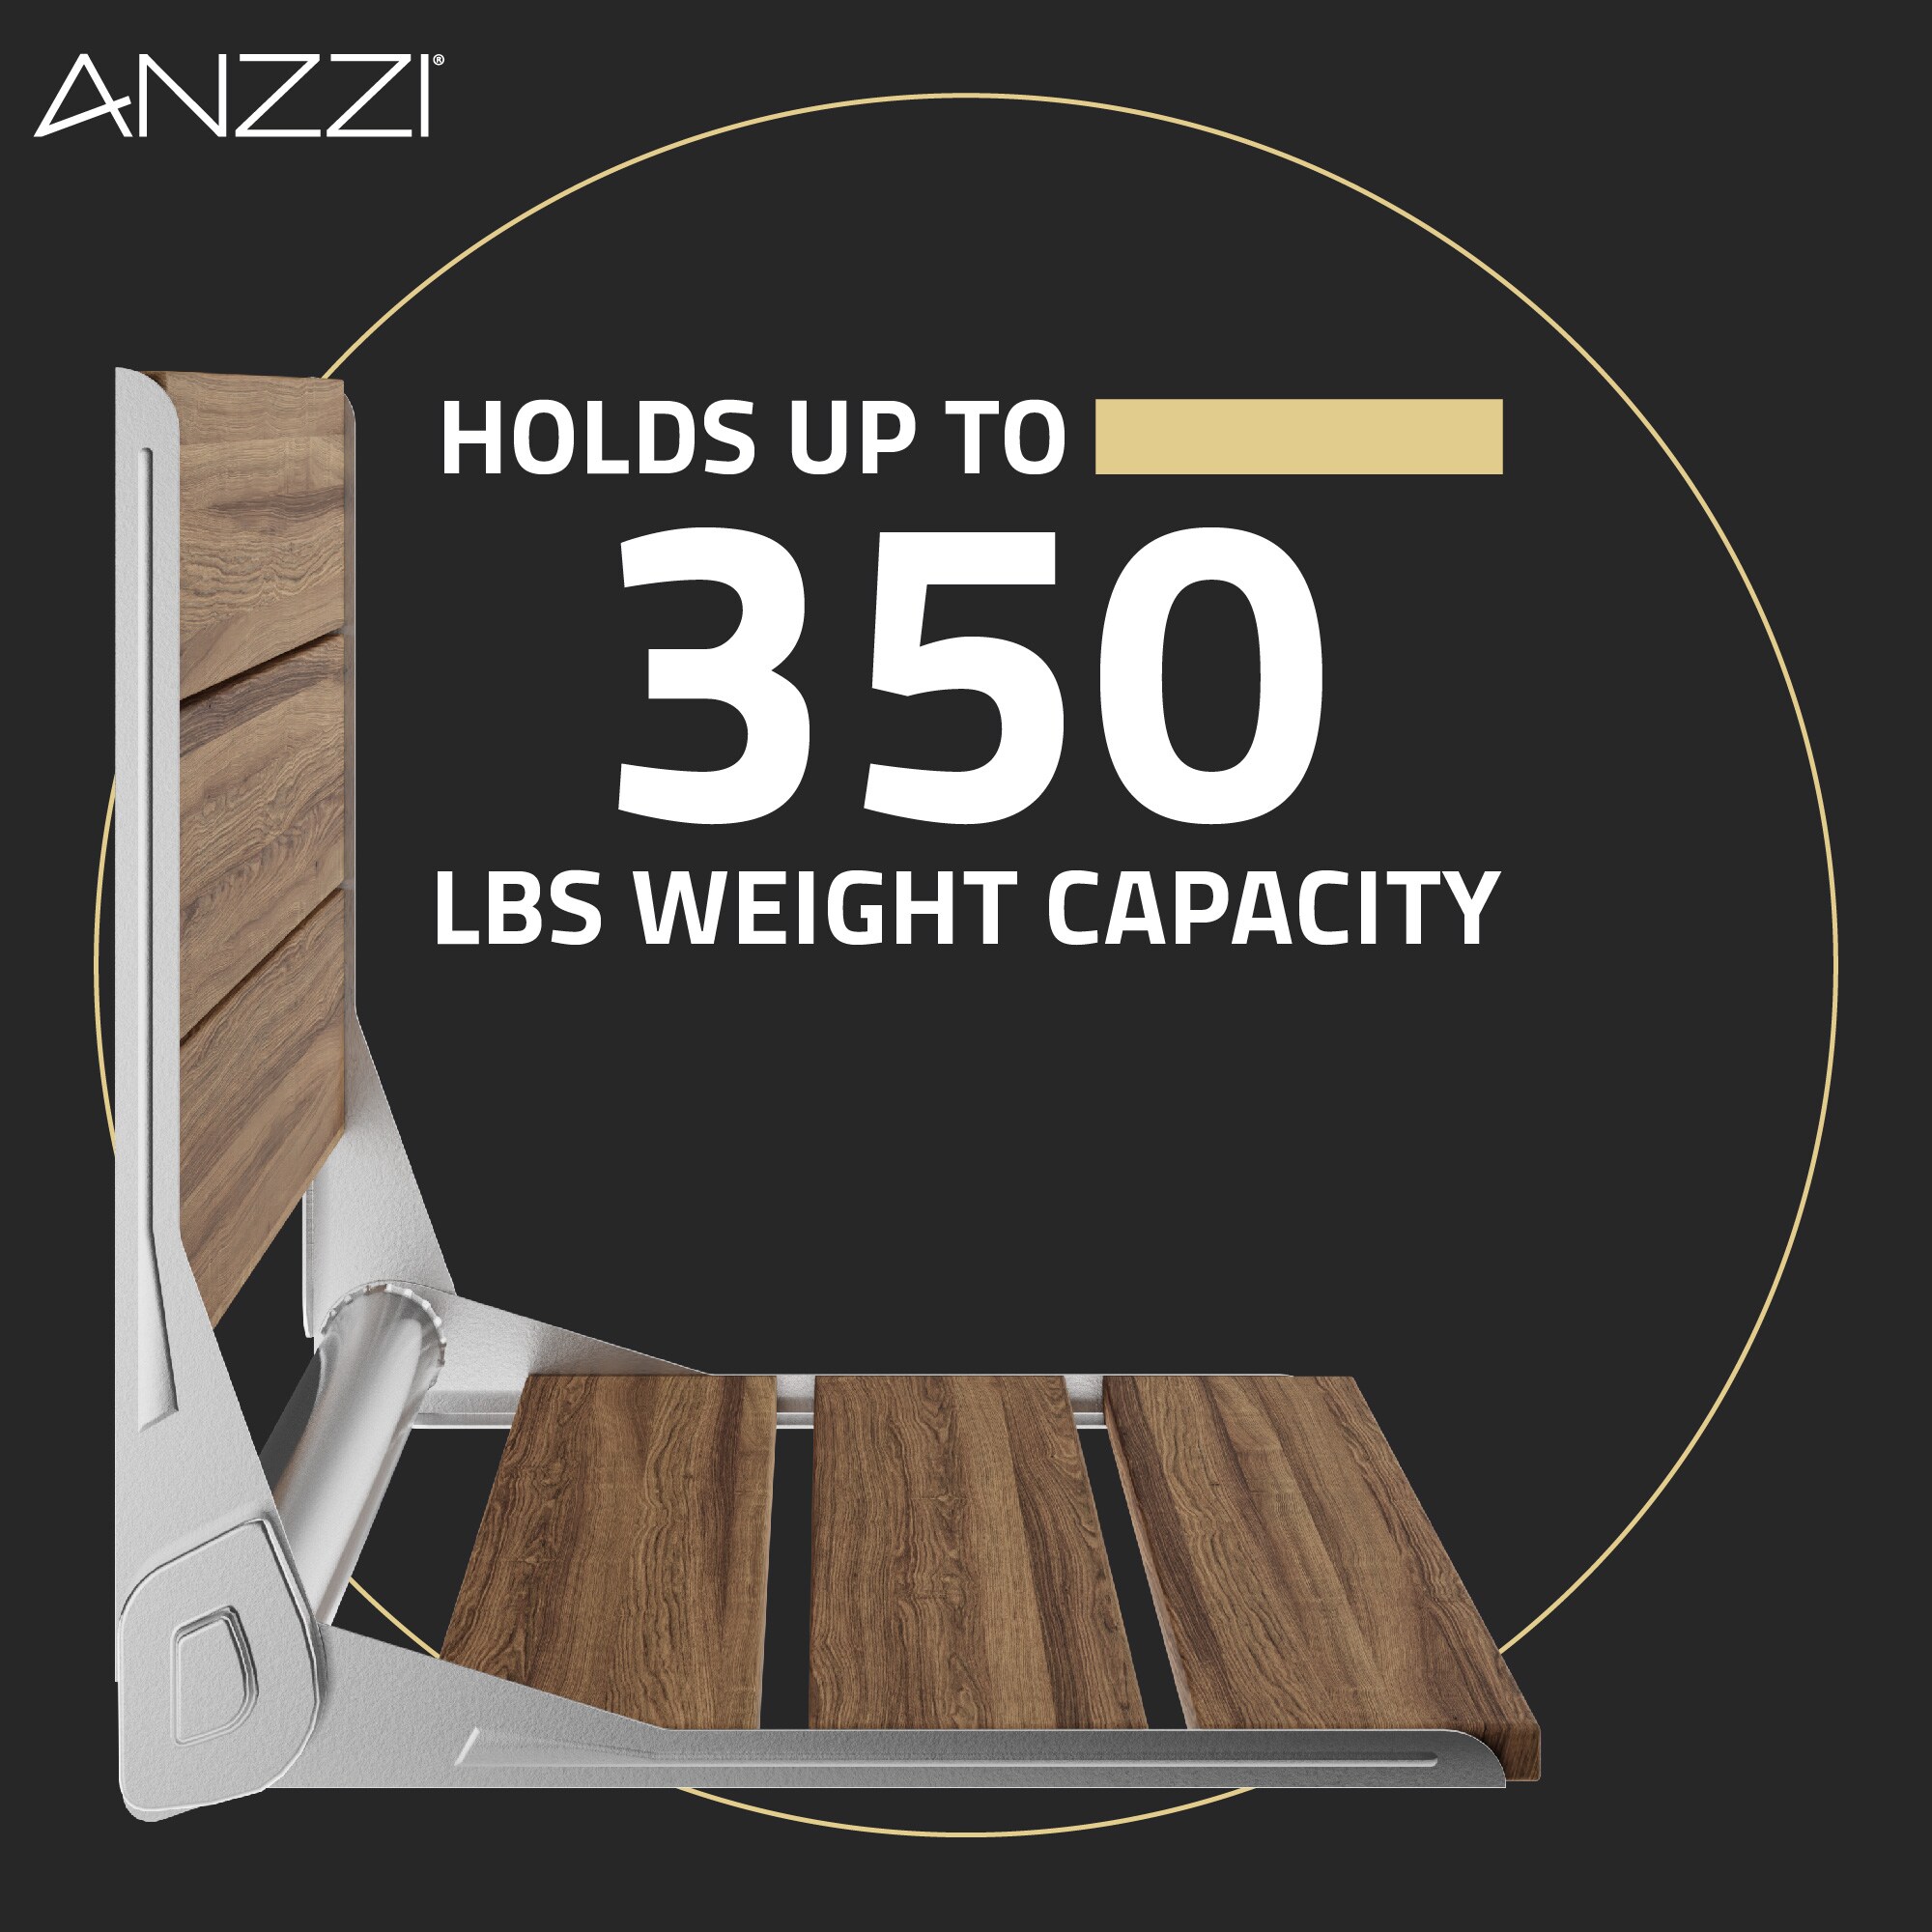 ANZZI Teak with Polished Chrome Hardware Wood Wall Mount Shower Seat (Ada Compliant)